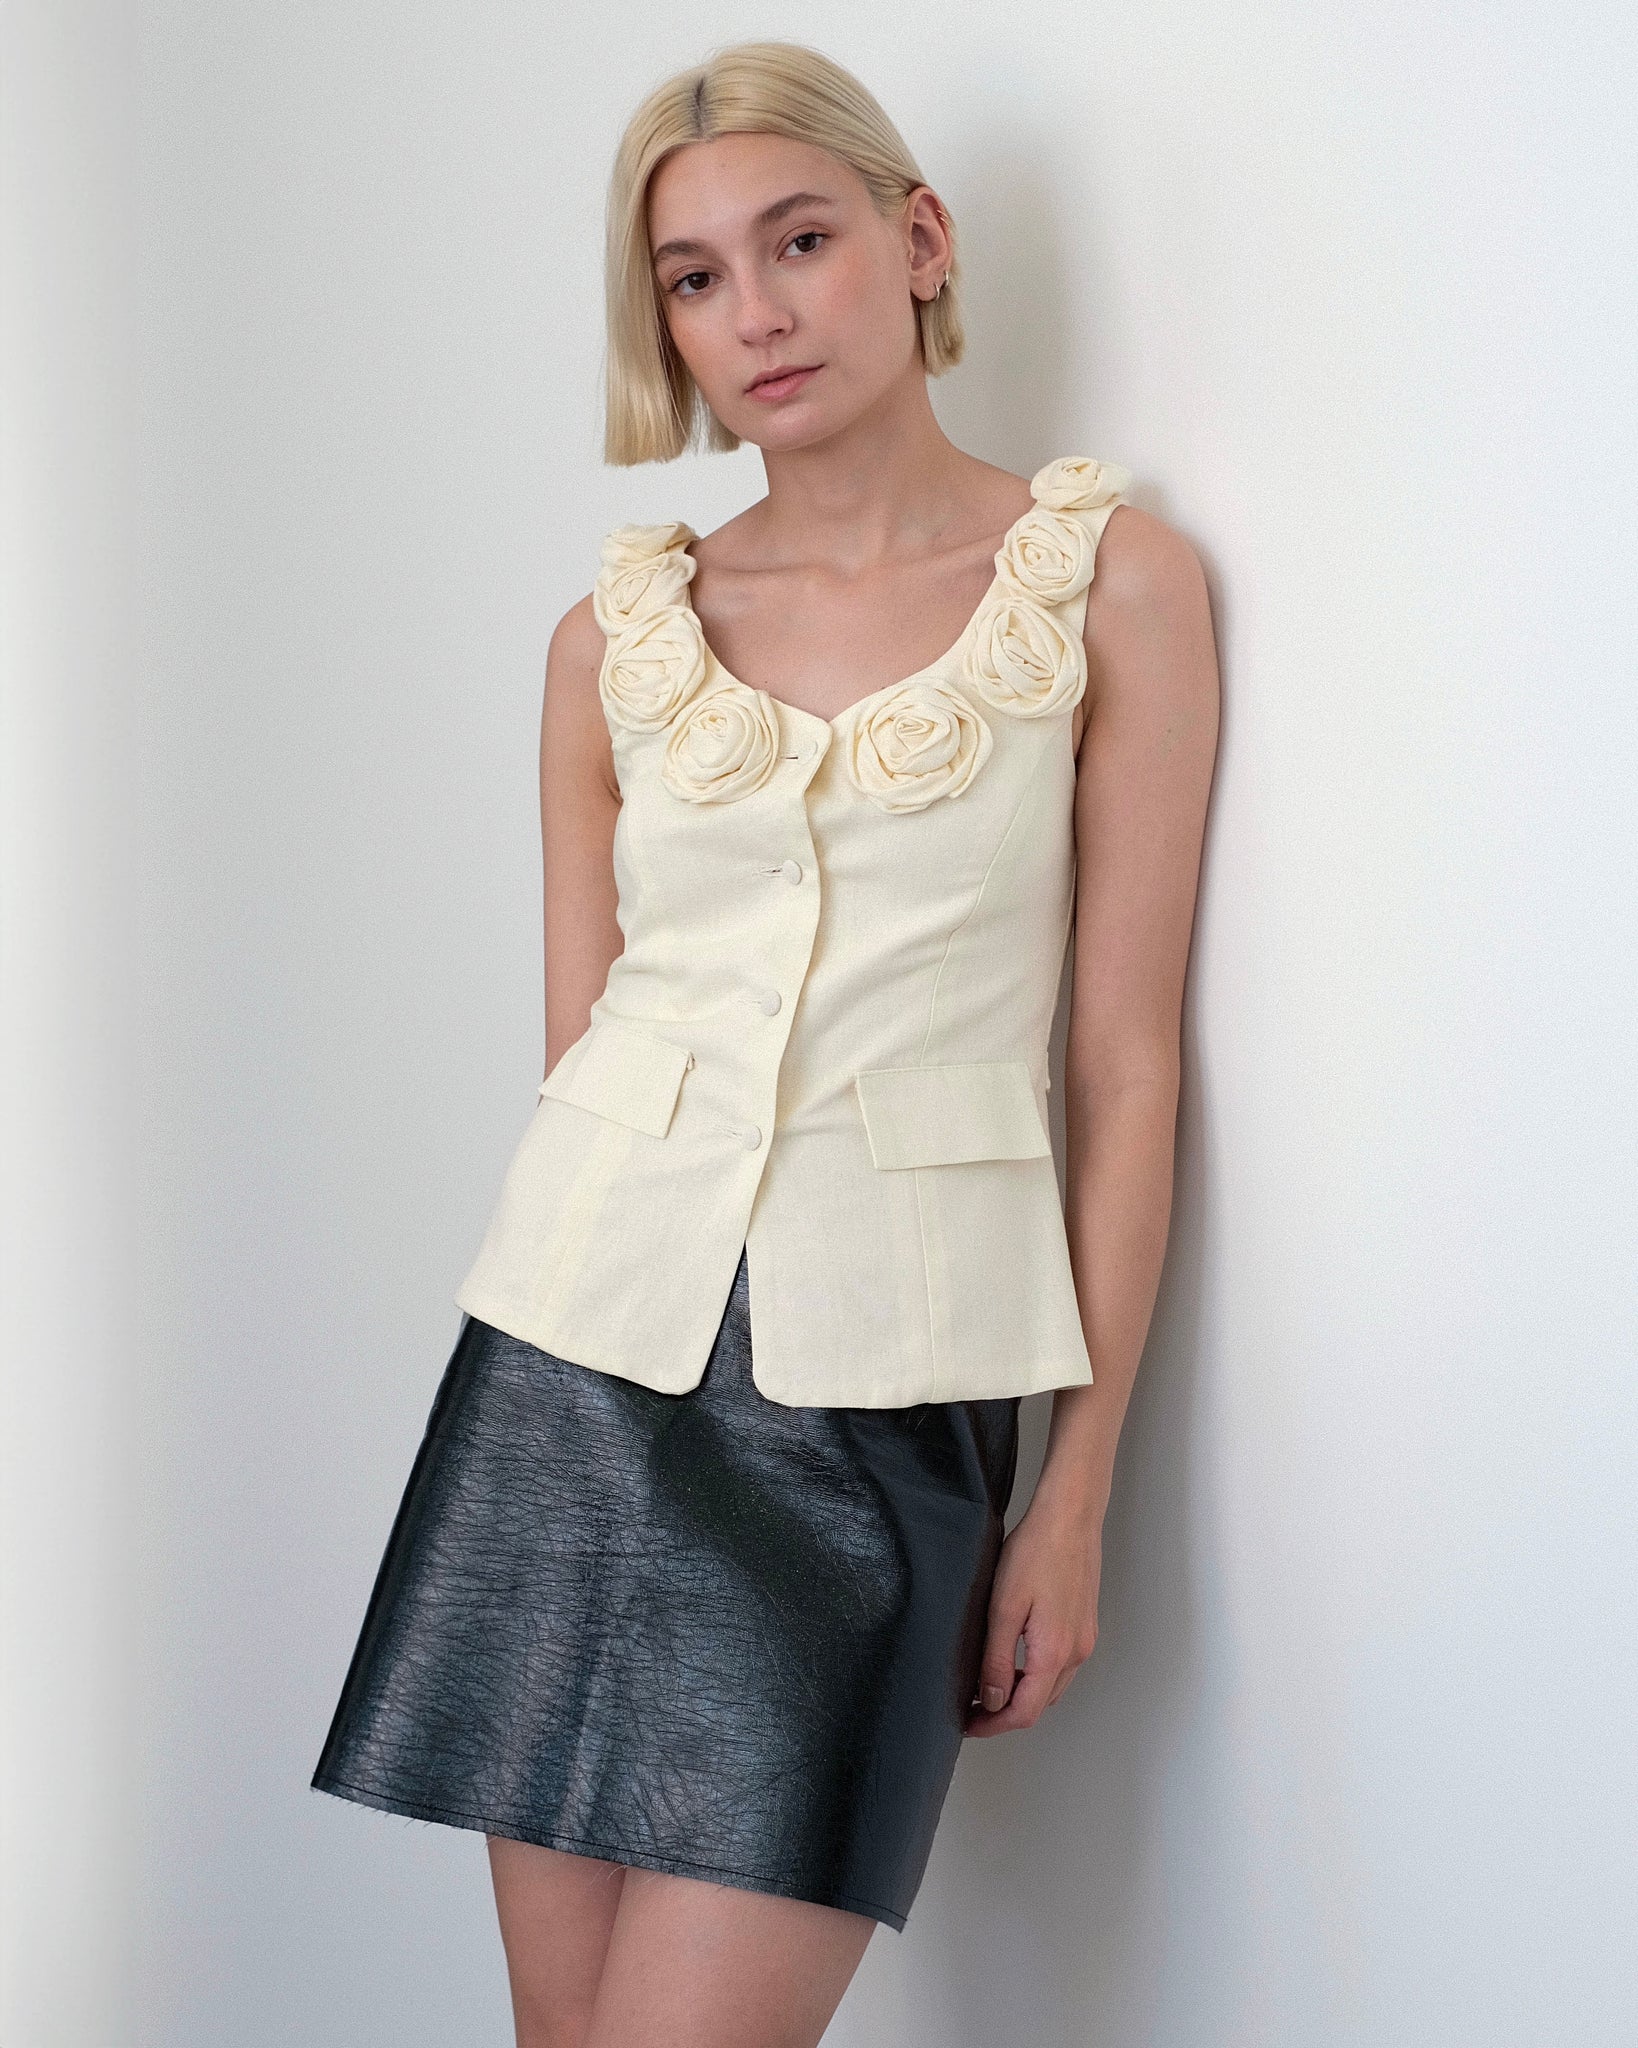 Model wearing the Loire vest top in ivory linen with floral embellished collar from Tach